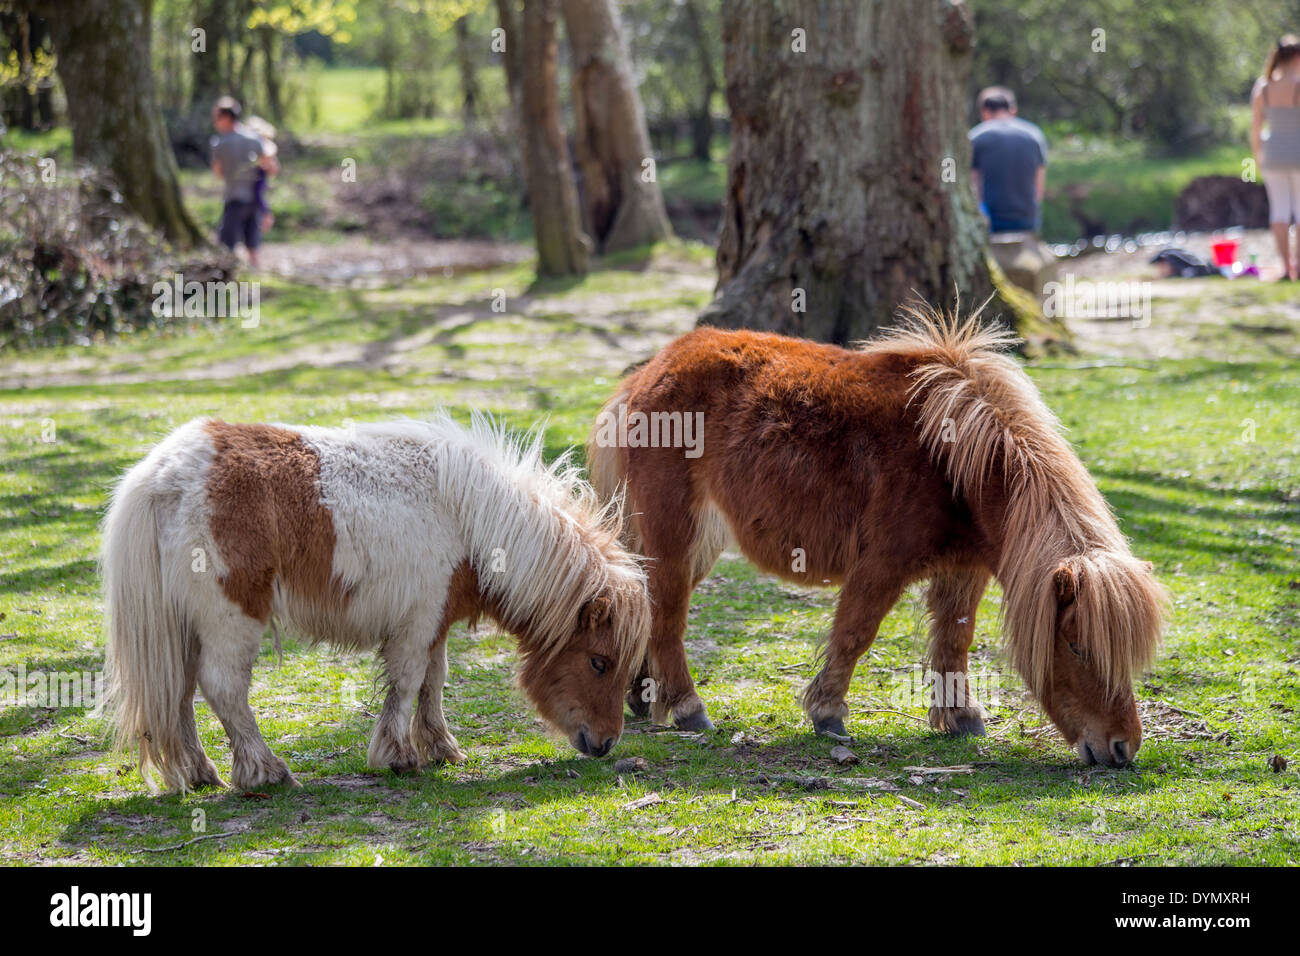 Miniature New Forest ponies Stock Photo